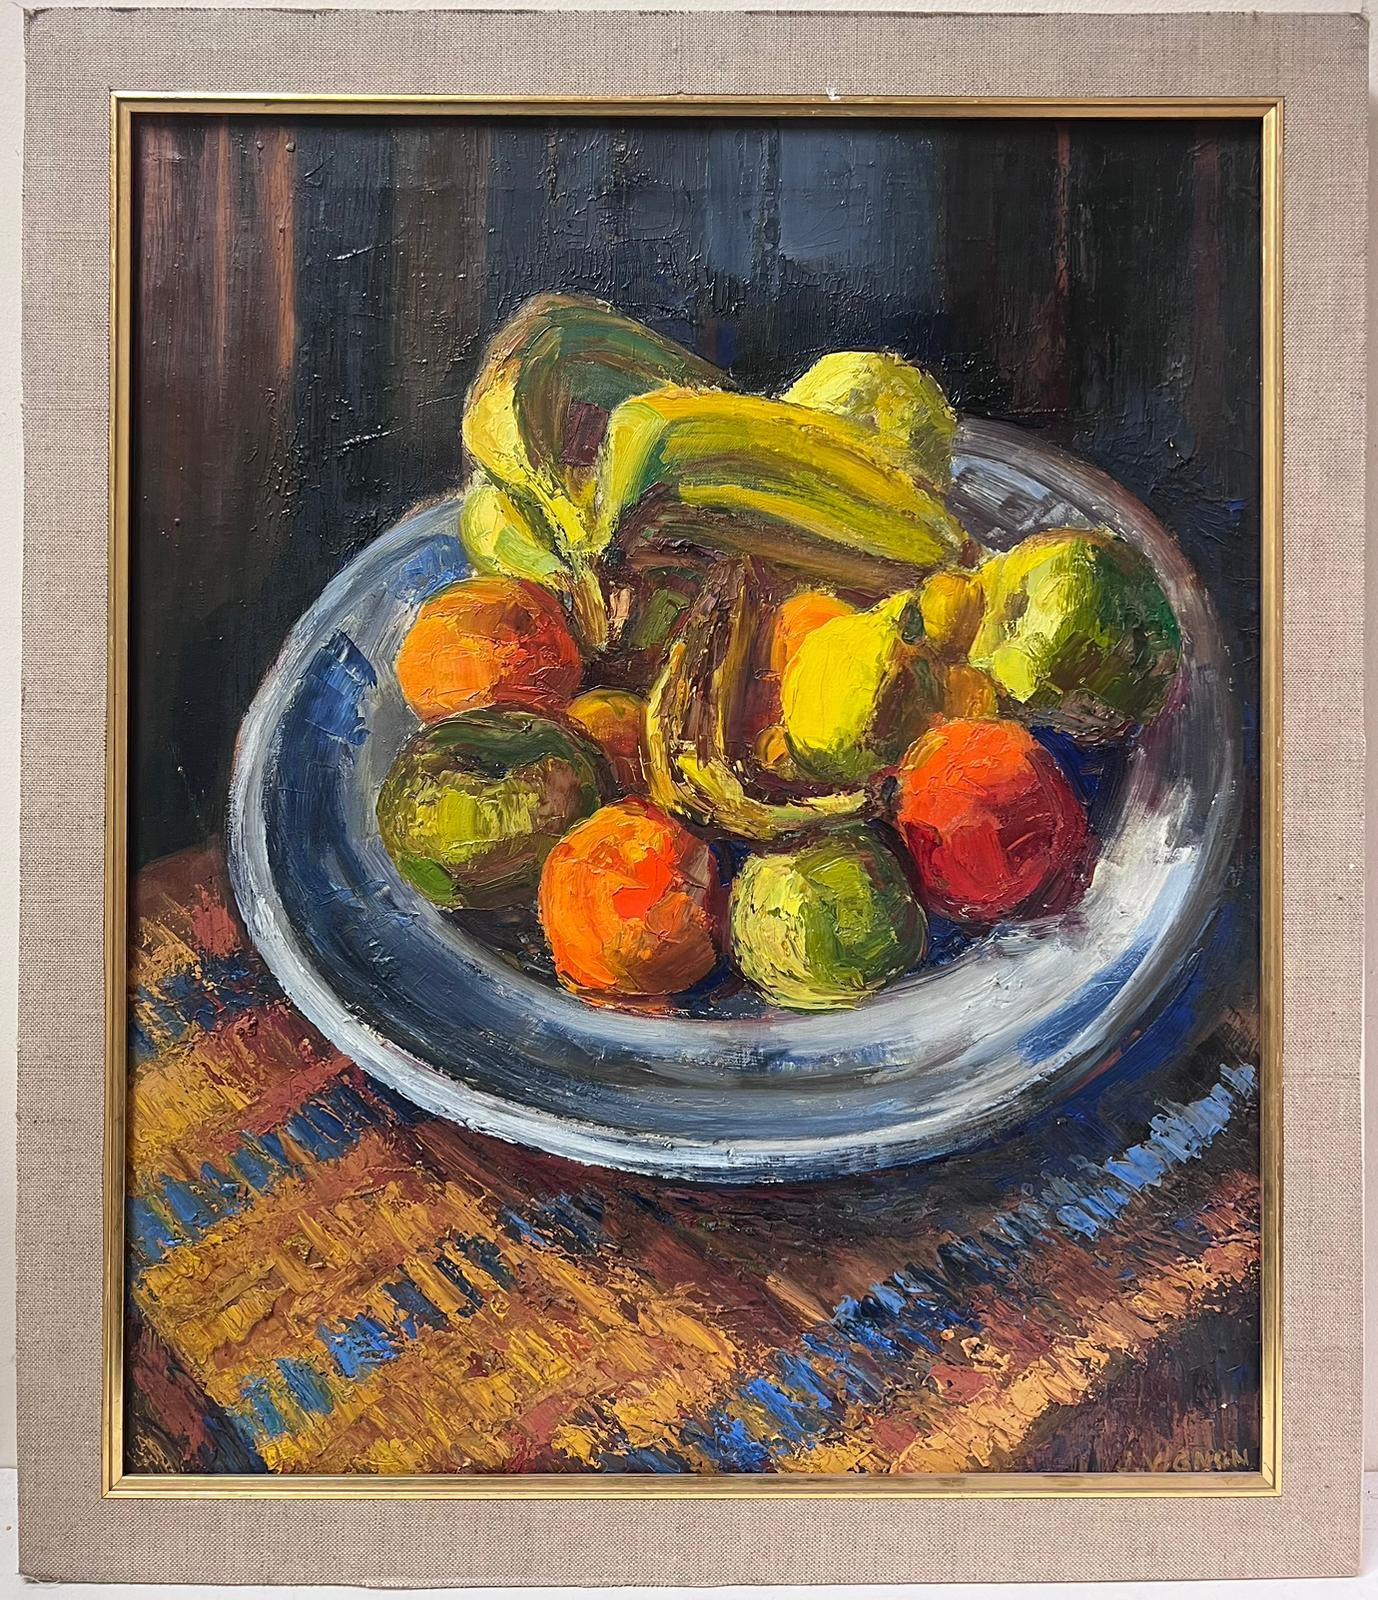 1950s French Post Impressionist Signed Oil Bowl of Fruit Bananas & Oranges - Painting by Josine Vignon